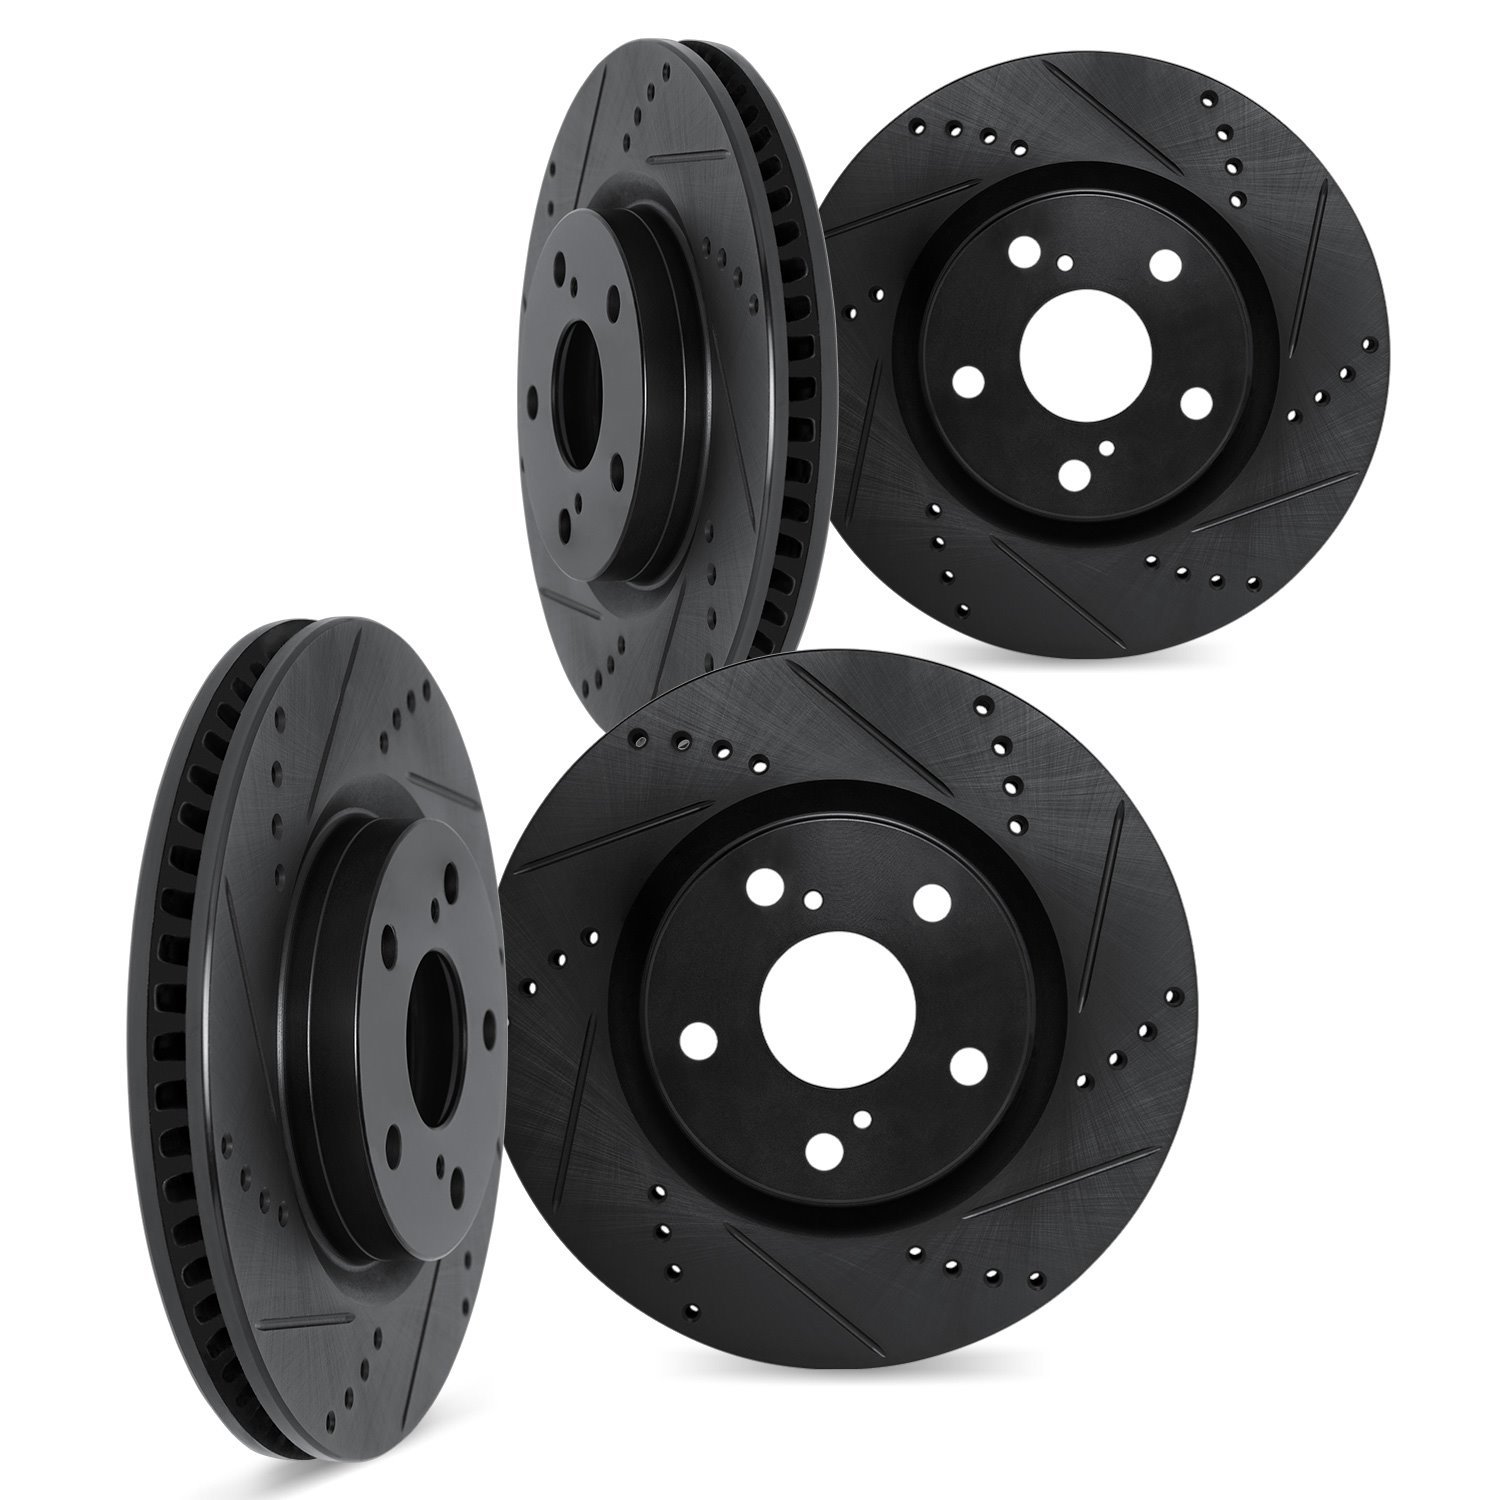 8004-73068 Drilled/Slotted Brake Rotors [Black], 2008-2011 Audi/Volkswagen, Position: Front and Rear